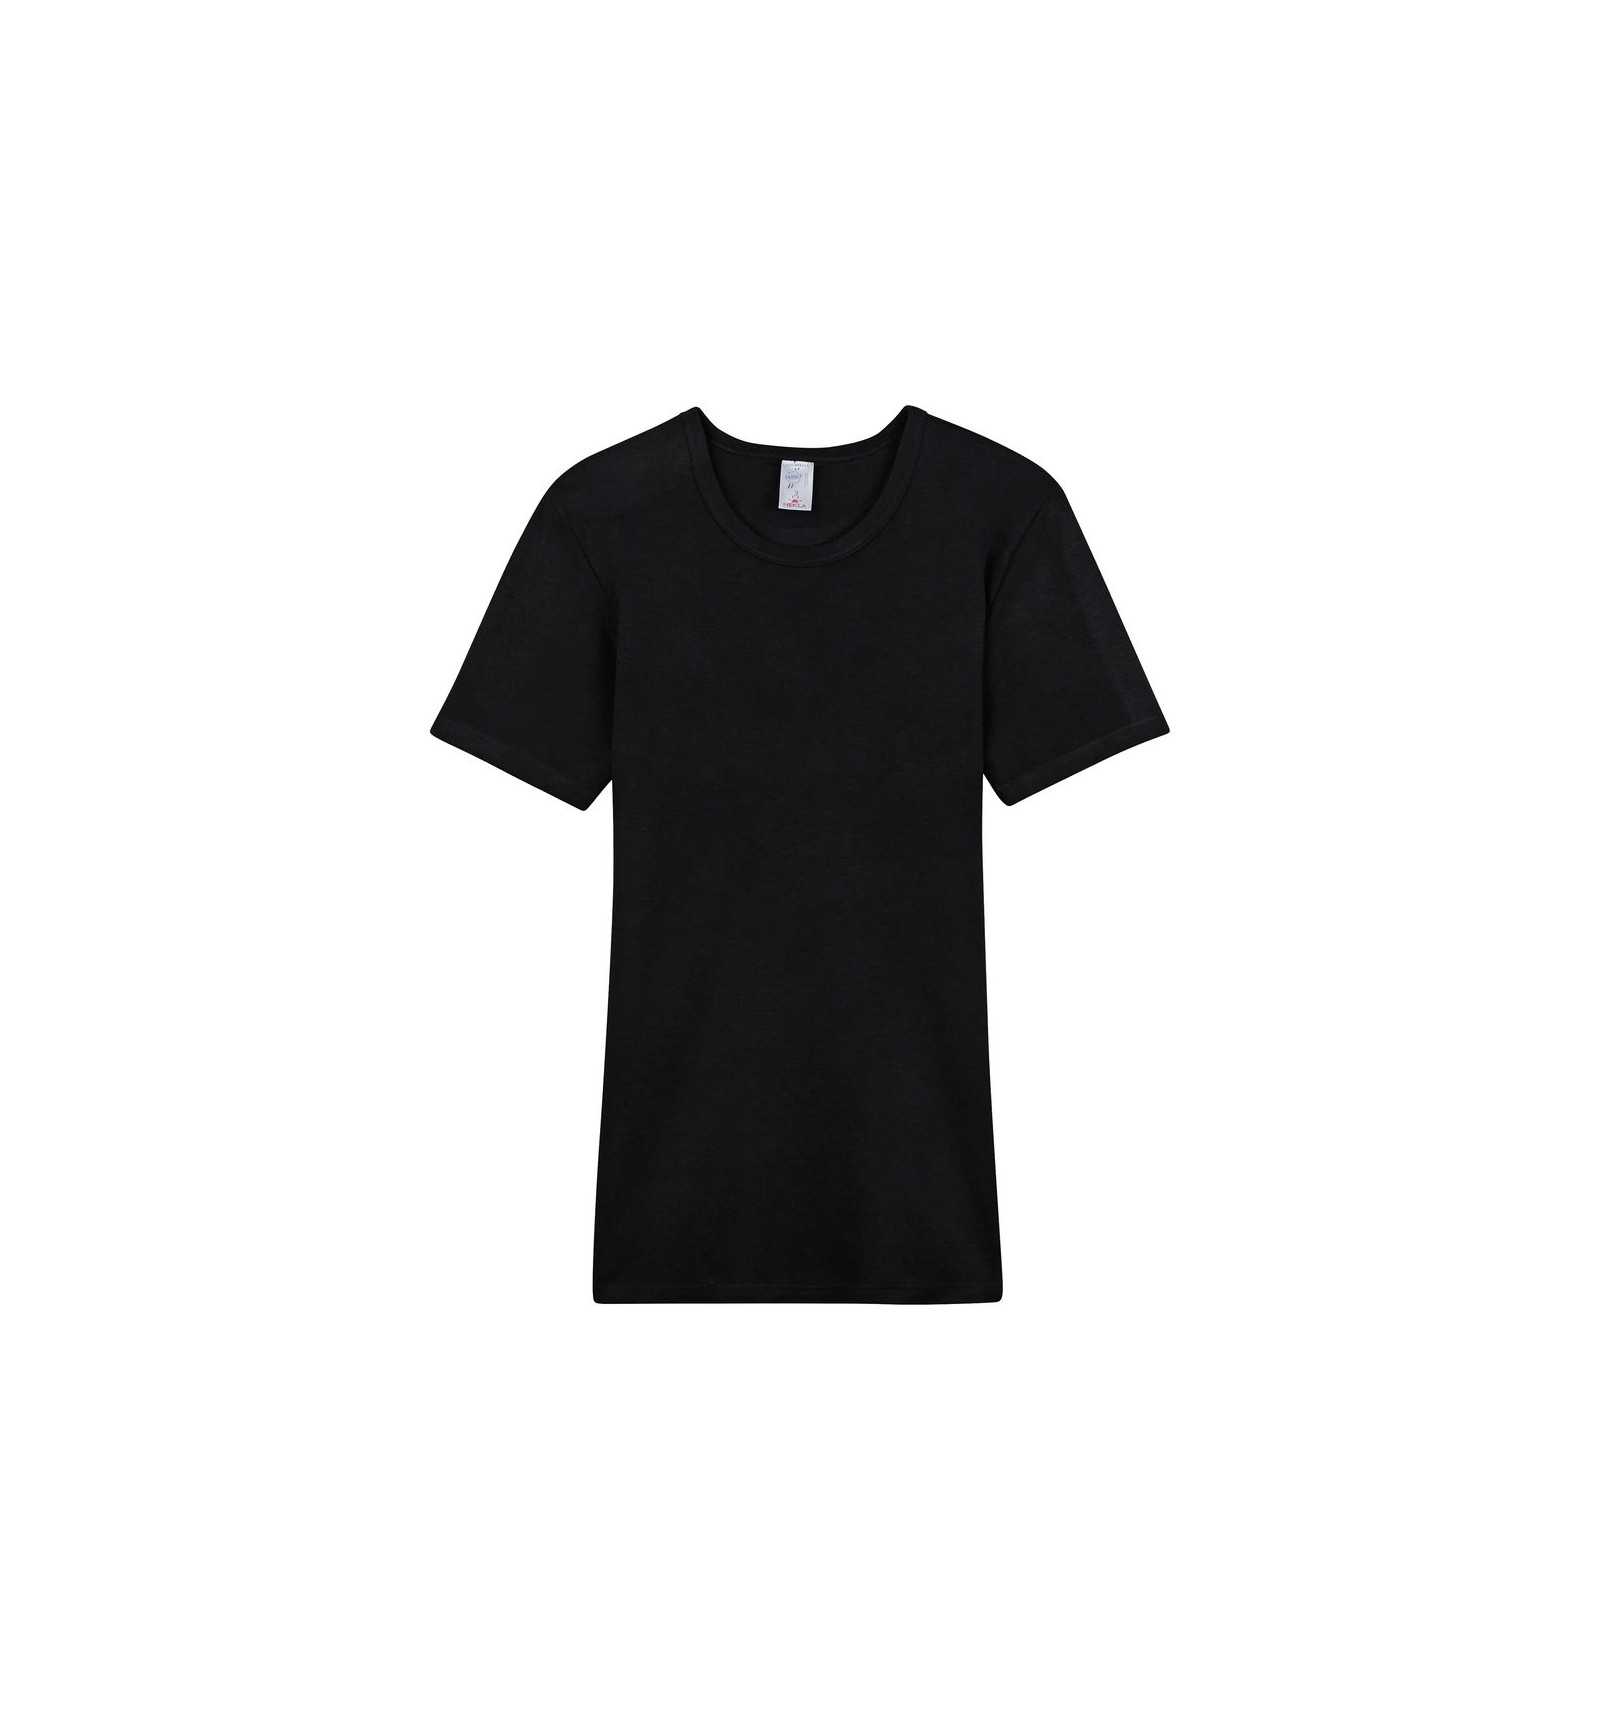 T-Shirt Thermique Homme Noir Ultra Chaud - Made in France